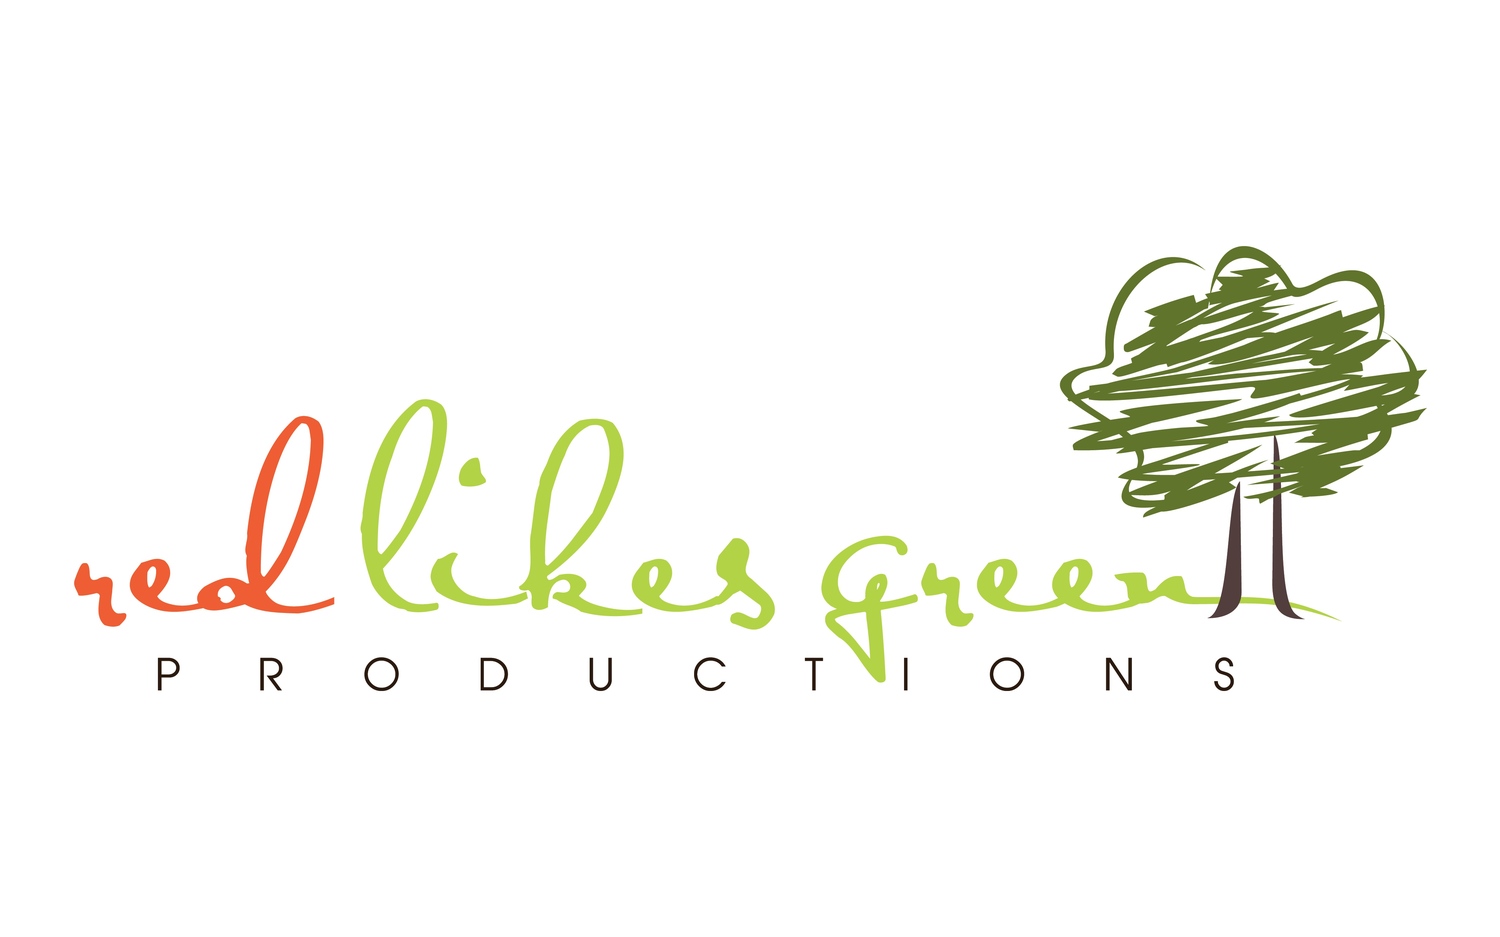 Red Likes Green Productions